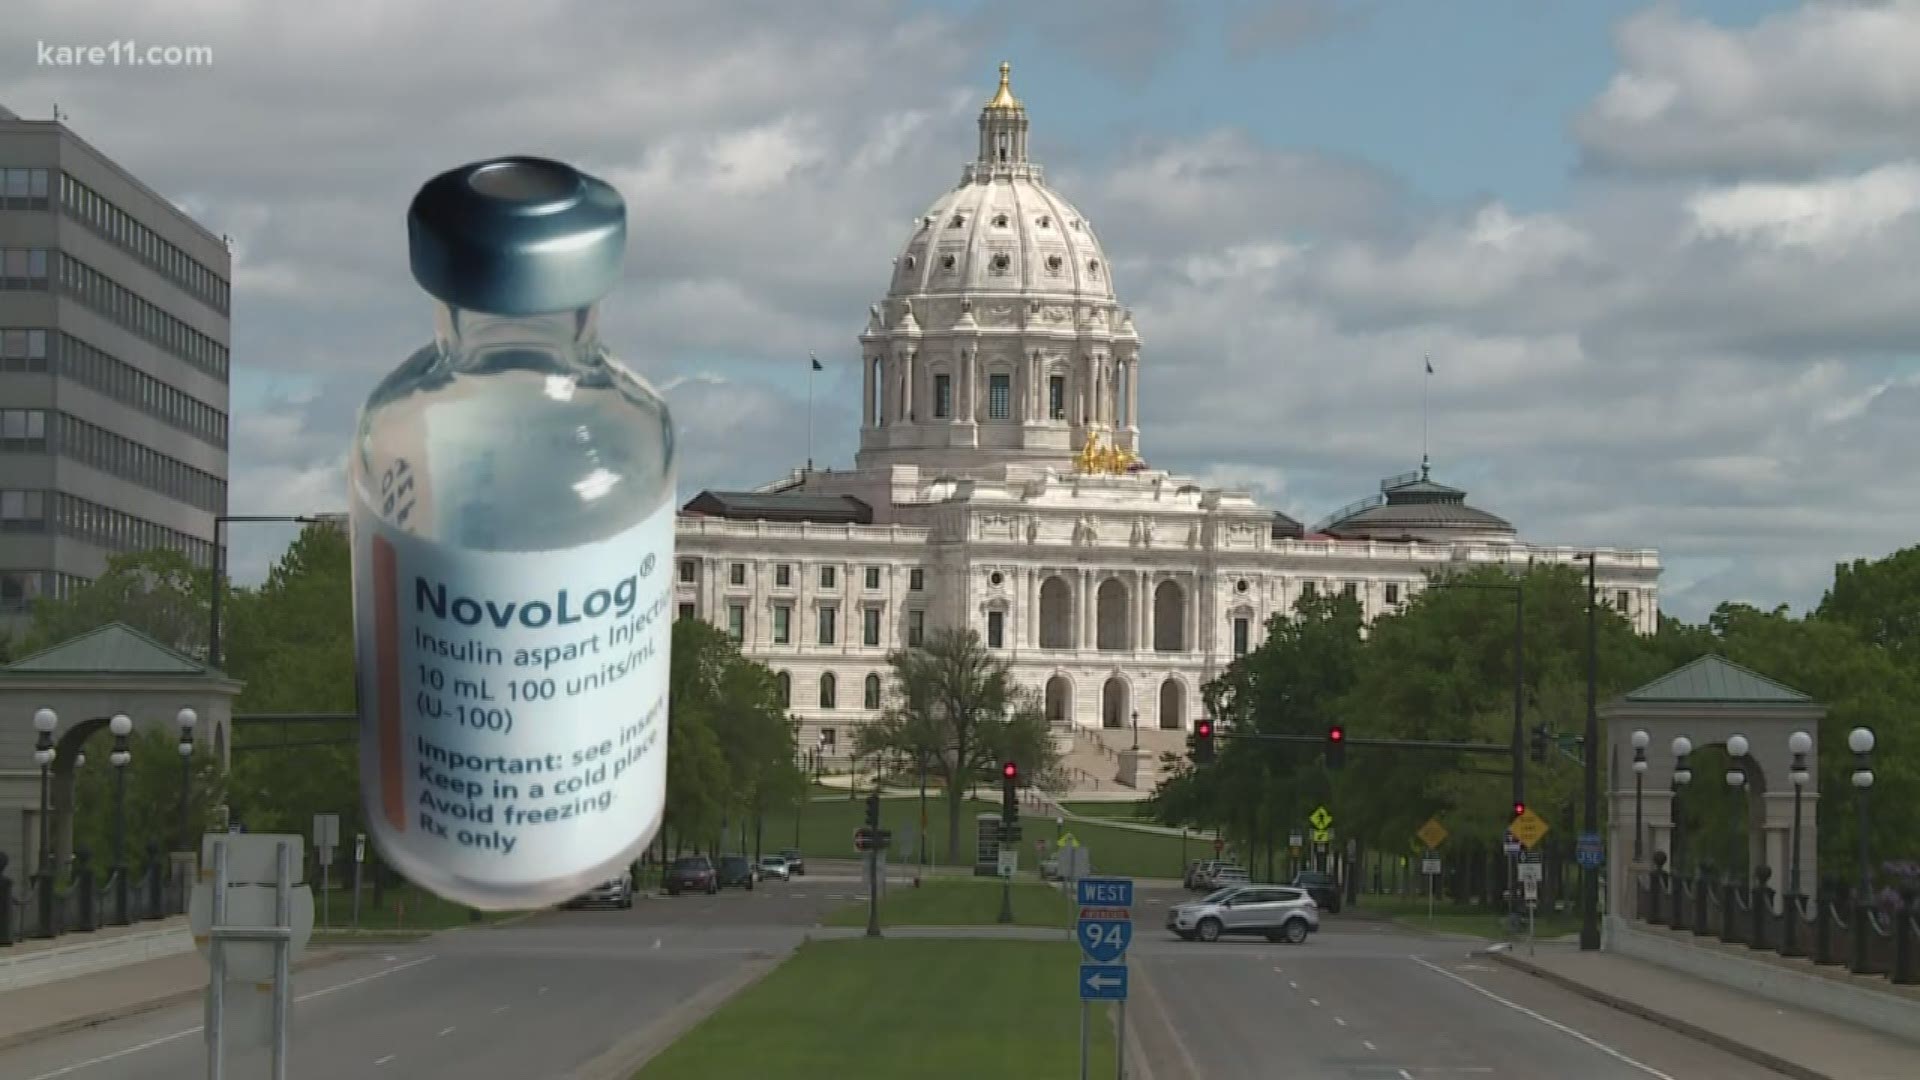 DFL leader pledges insulin bill will be ready by the end of September, when the House holds an informational hearing.